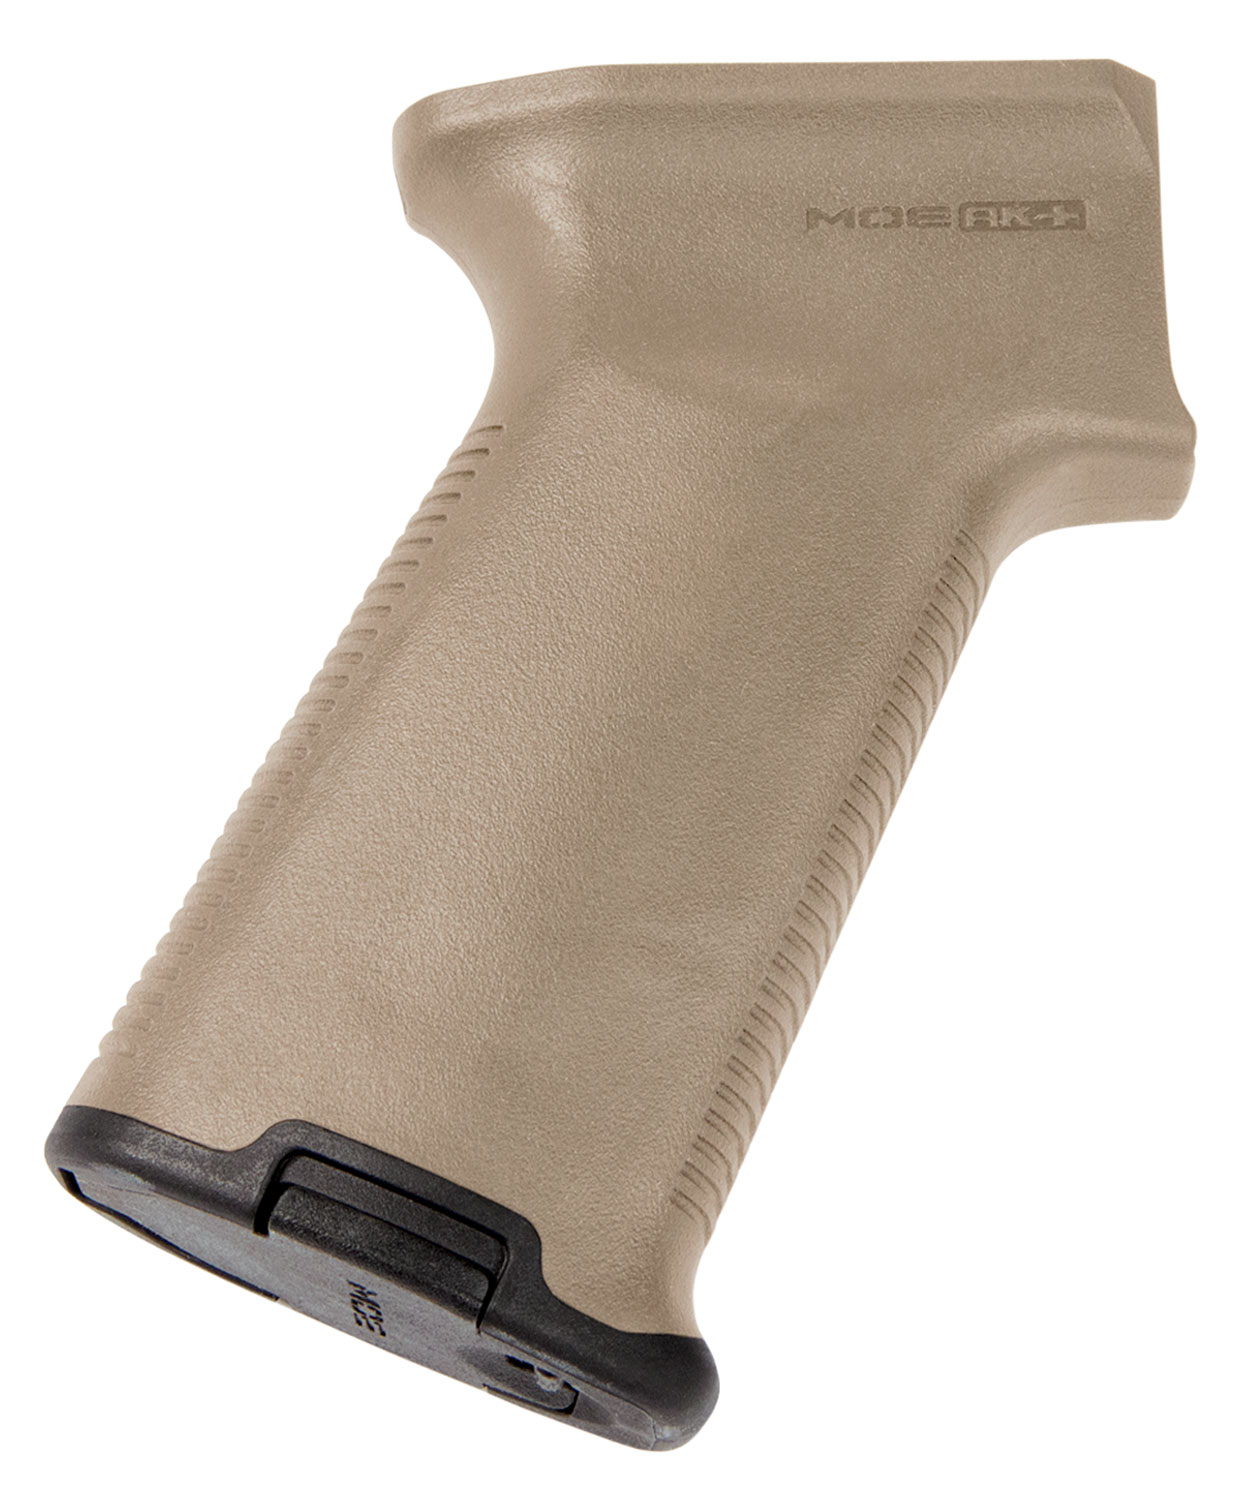 Magpul MAG537-FDE MOE+ Grip Flat Dark Earth Polymer with OverMolded Rubber for AK-47, AK-74